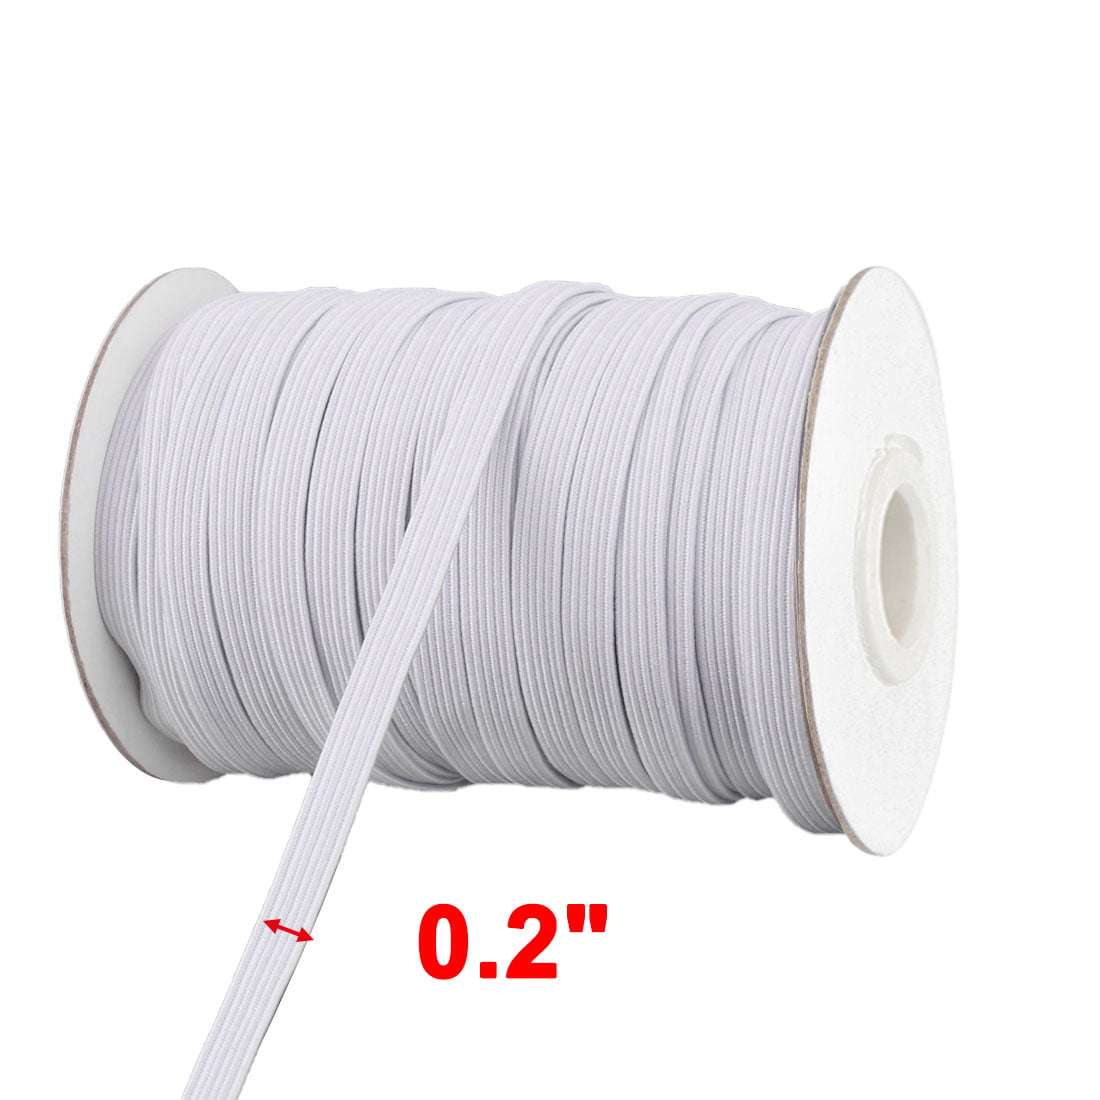 Unique Bargains Rubber Elastic String Sewing Pants Trousers Garments Band Rope White 2m Length, Size: Others